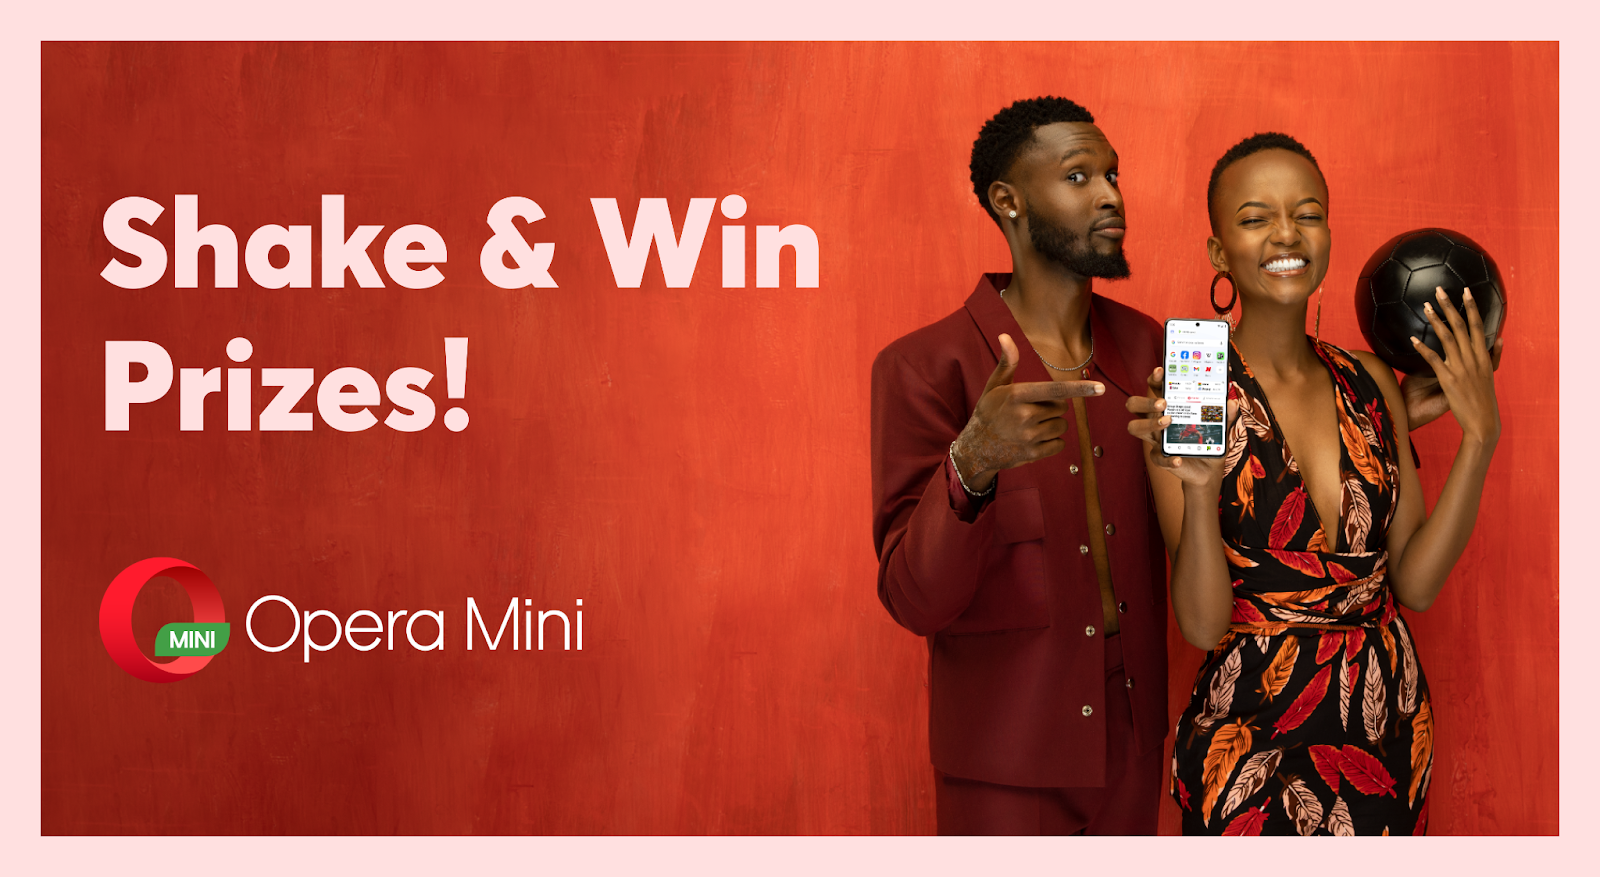 Opera kicks off its World Cup campaign with "Shake and Win," a contest in which you only need to shake your phone to have a chance at winning daily prizes worth over $300,000!